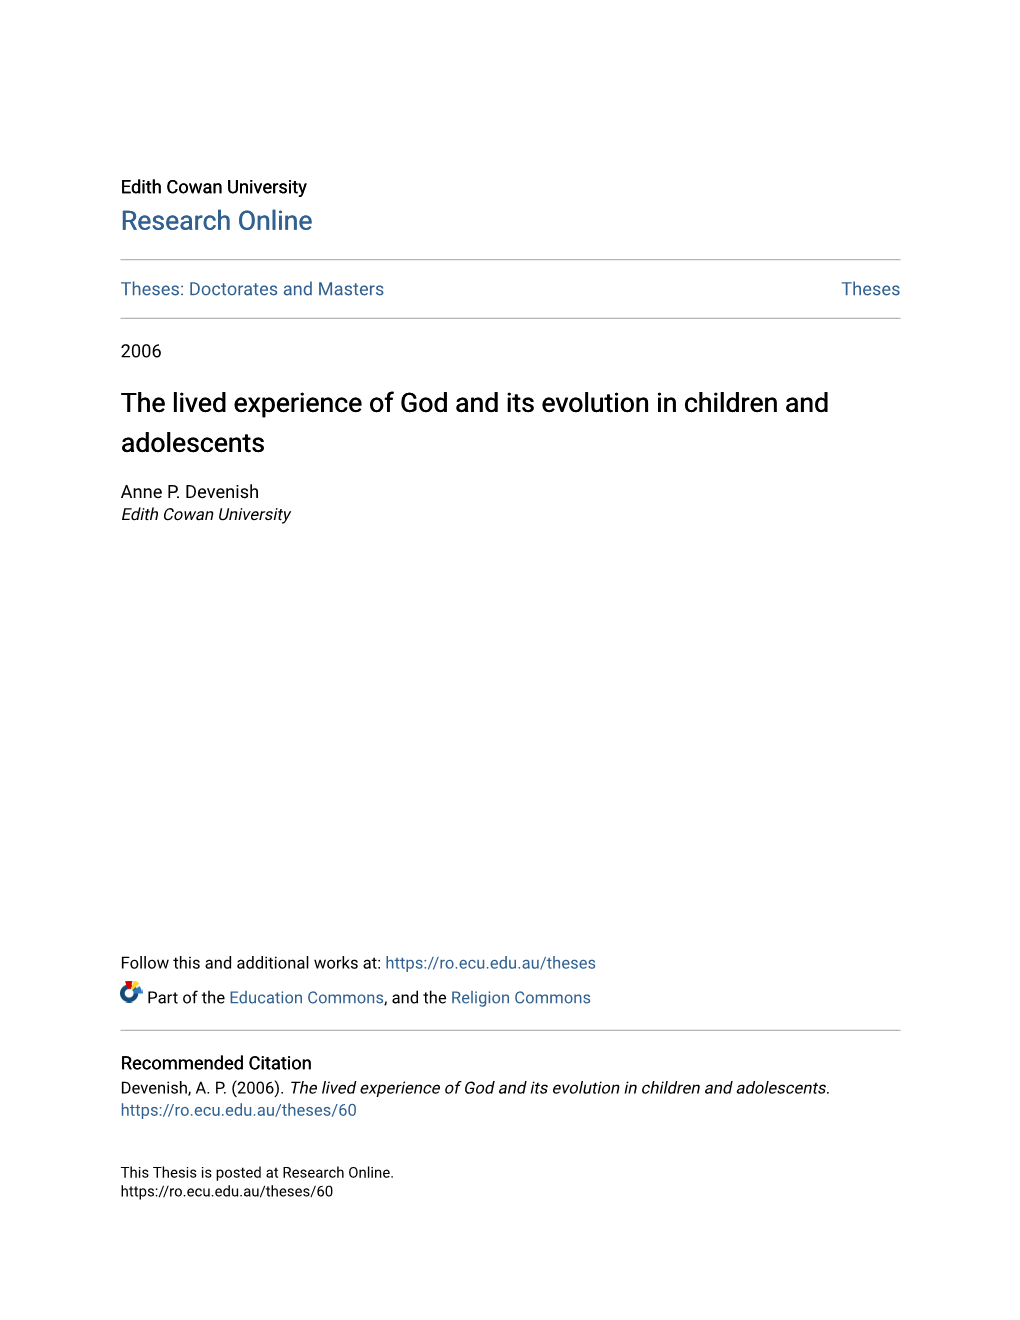 The Lived Experience of God and Its Evolution in Children and Adolescents